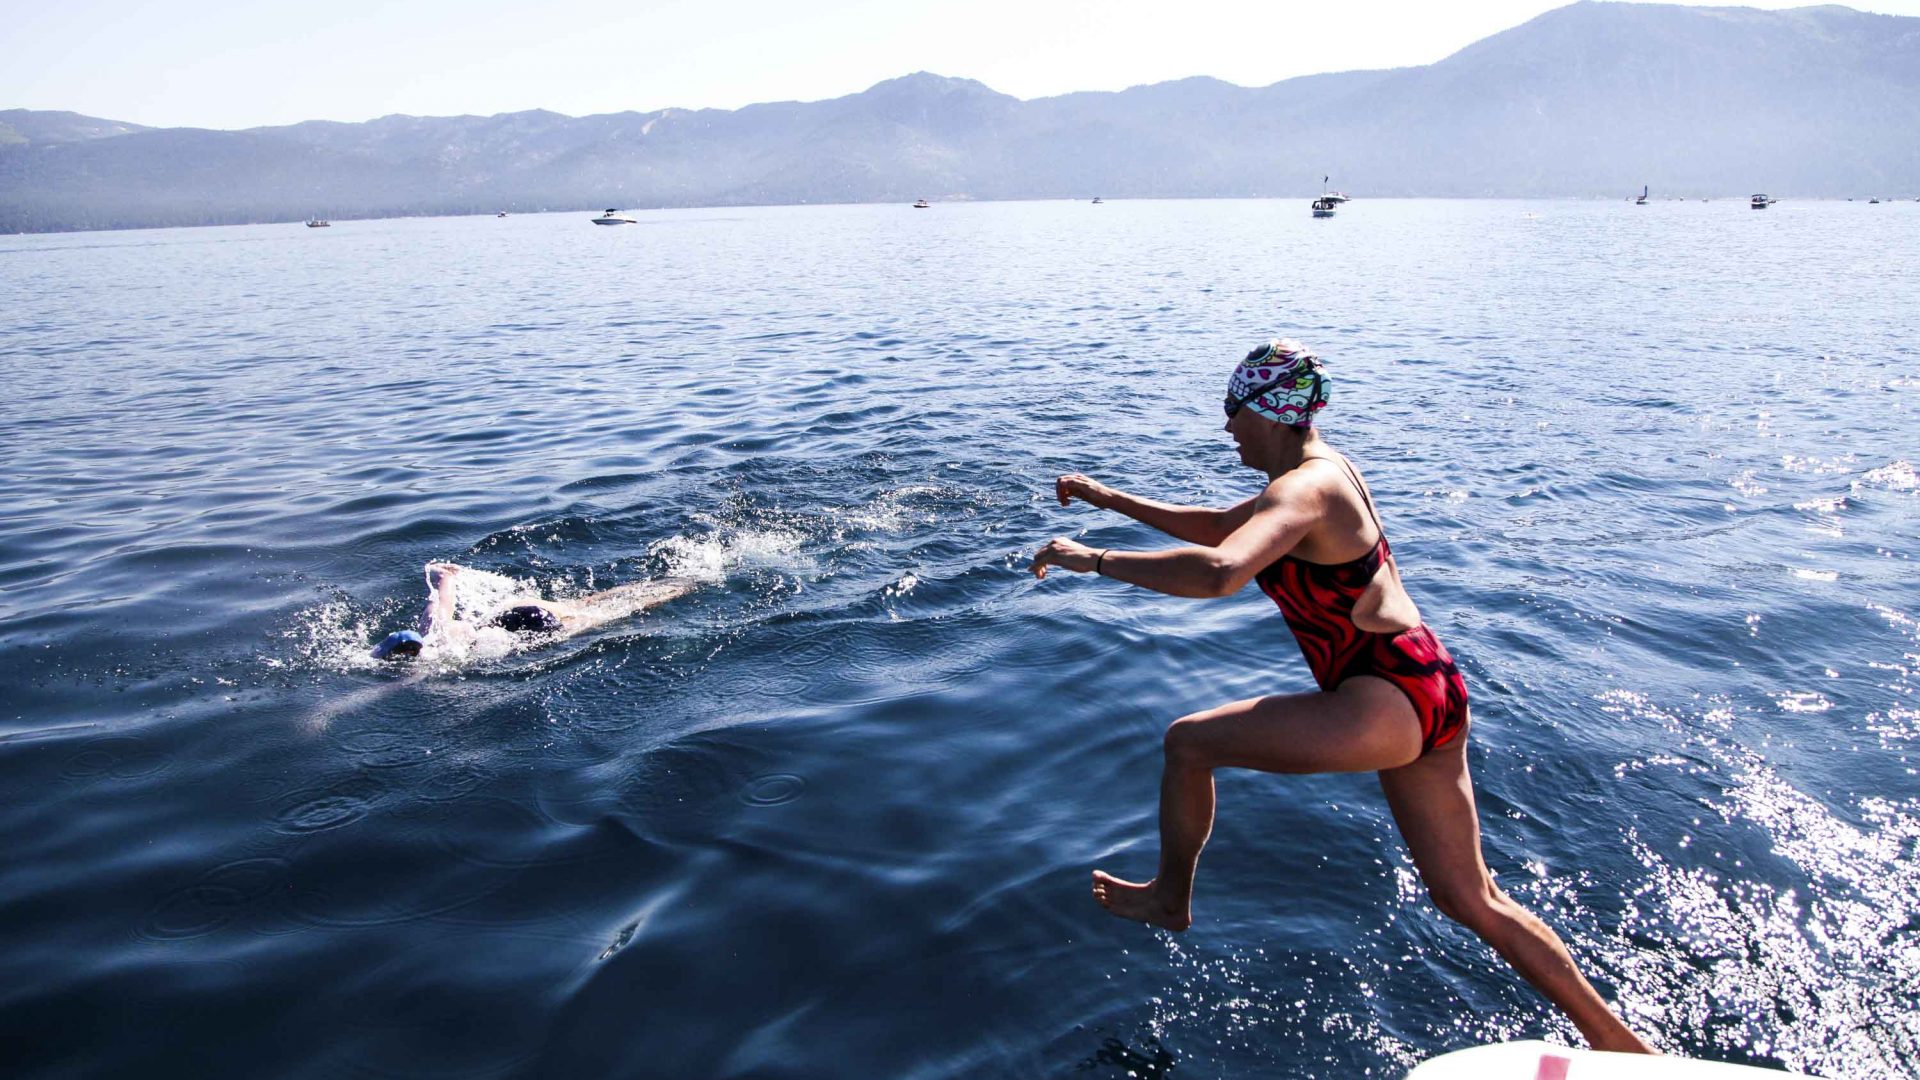 One woman jumps from a boat into the water while another swims by.